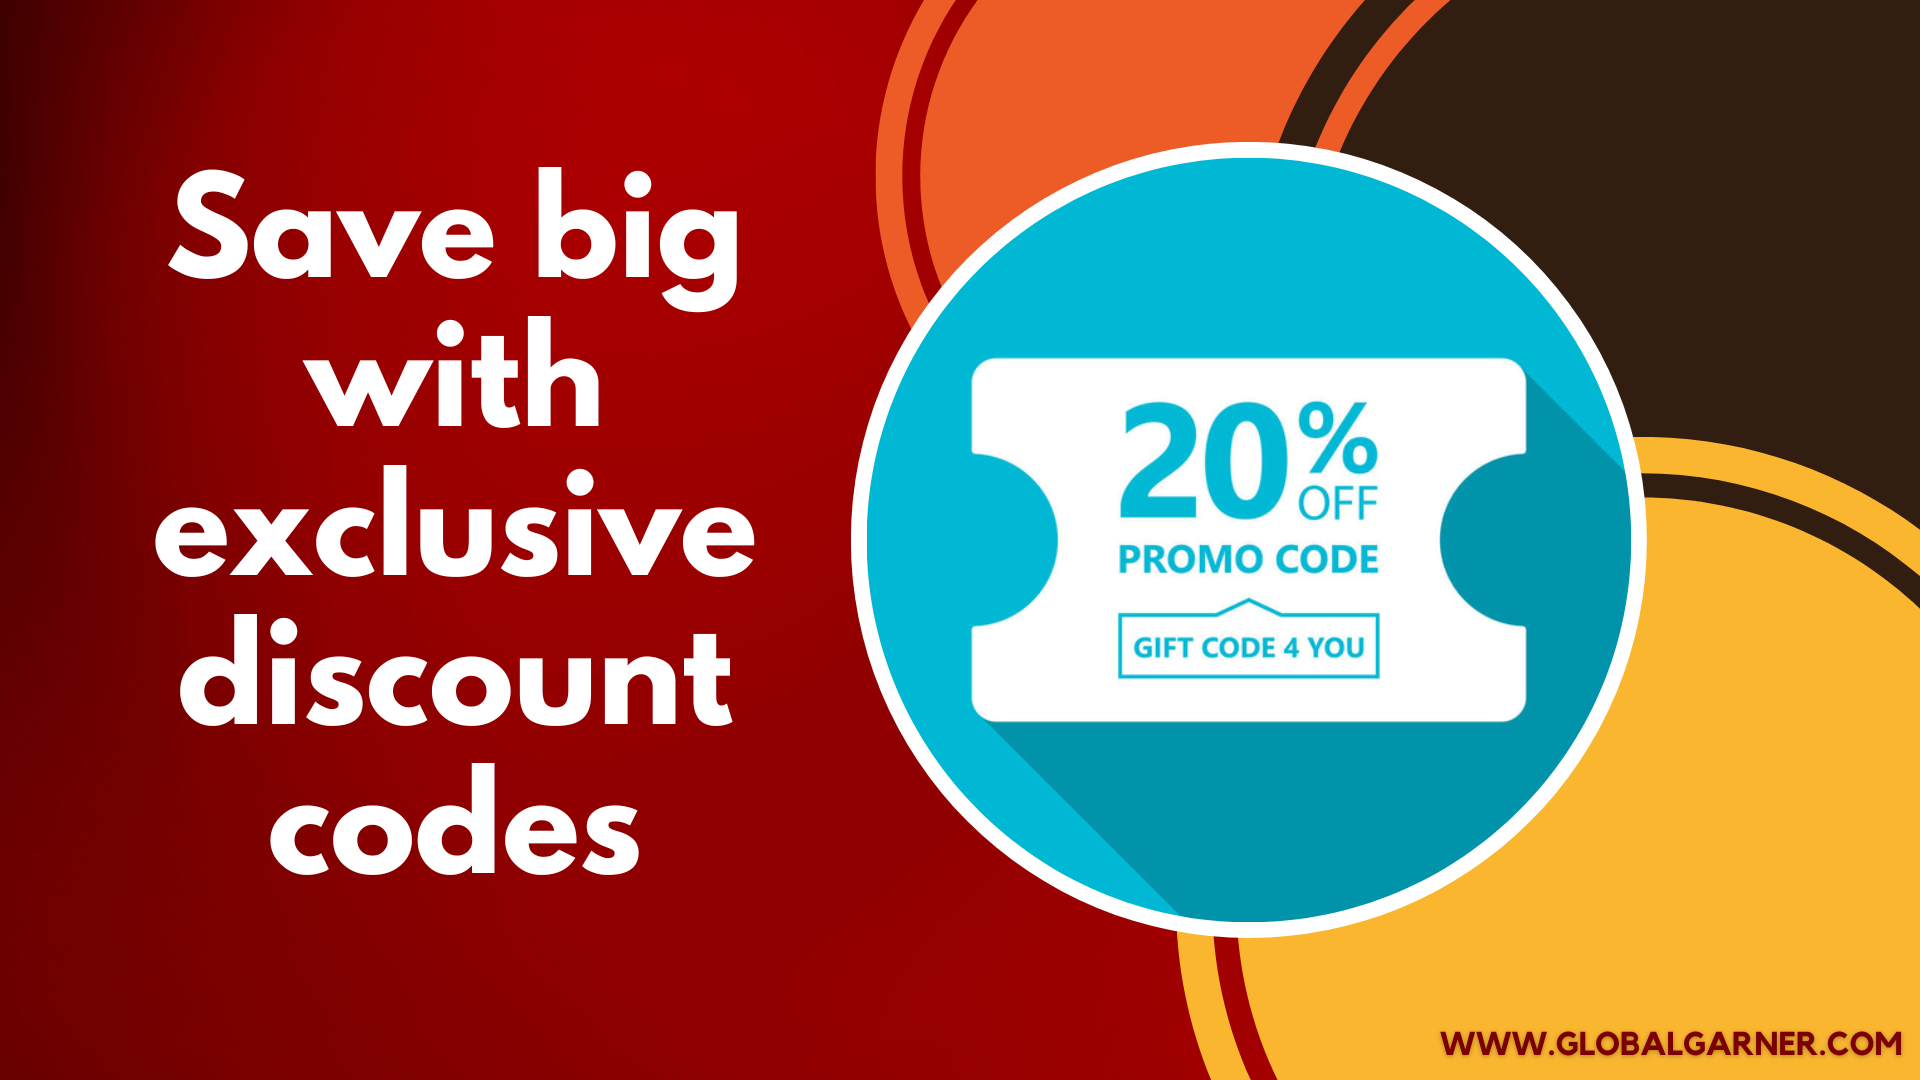 Save big with exclusive discount codes